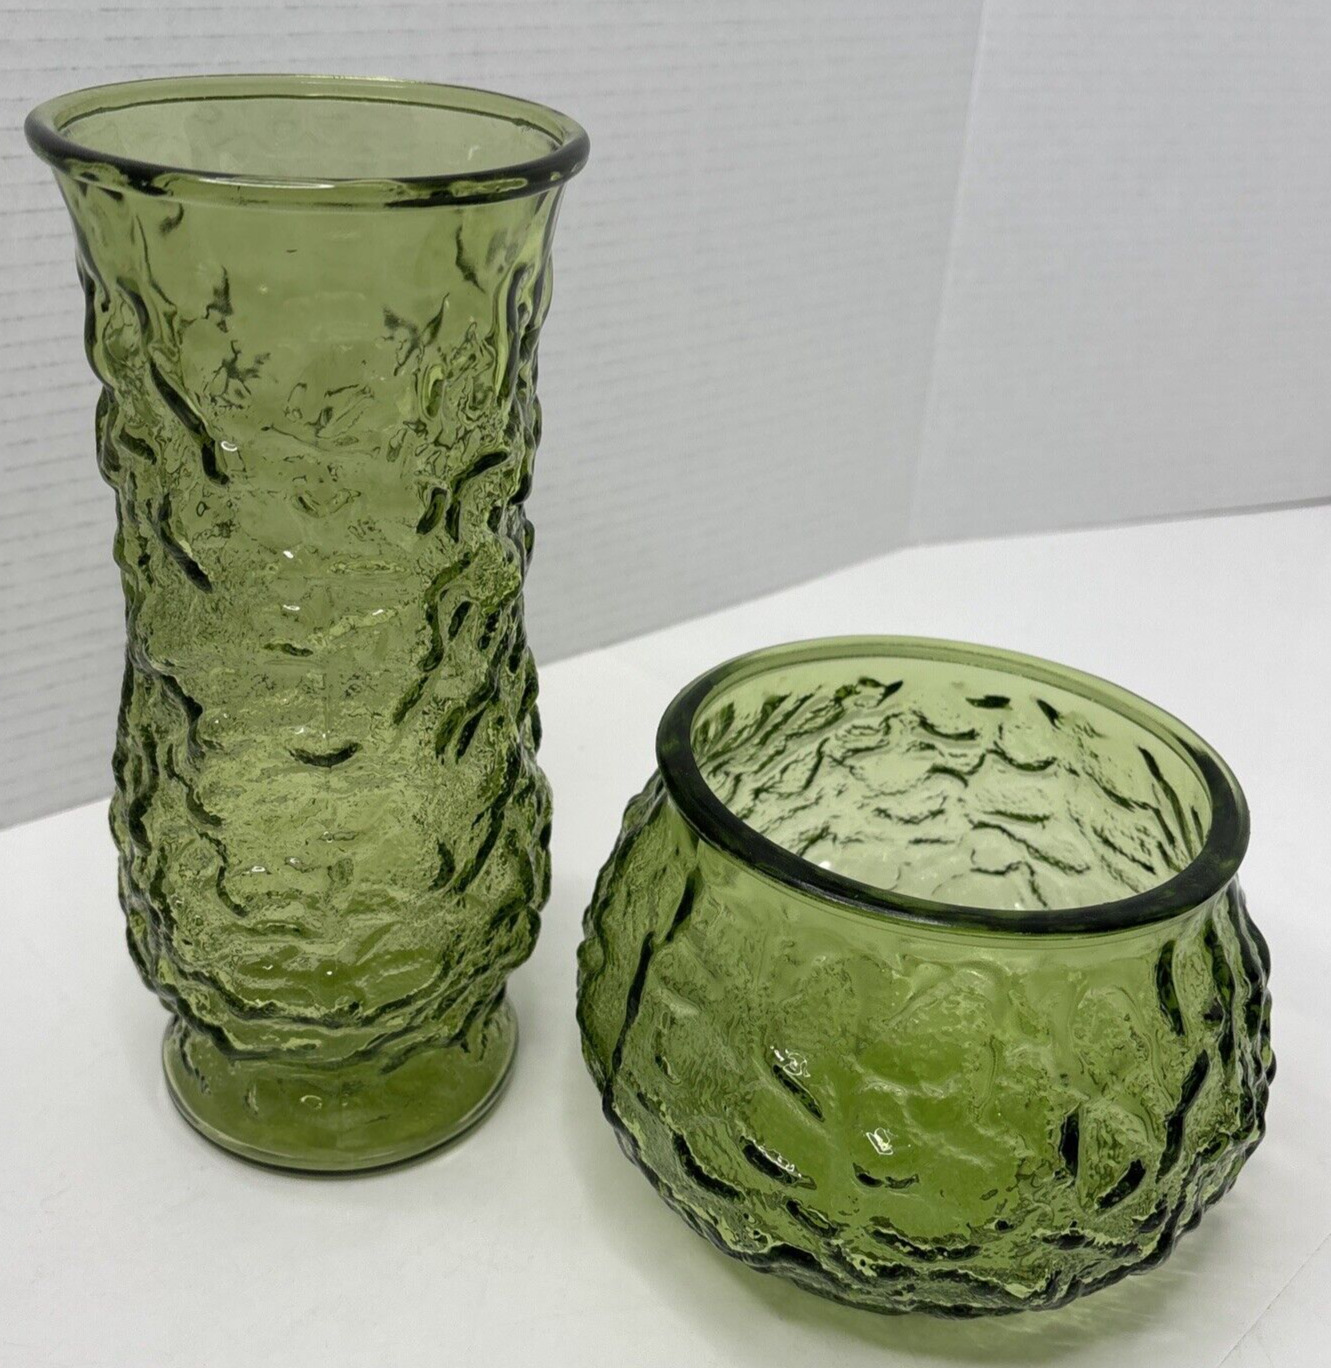 Vintage Green E.O. Brody Co. Cleveland O. USA Crinkle Textured Glass Vase Pair